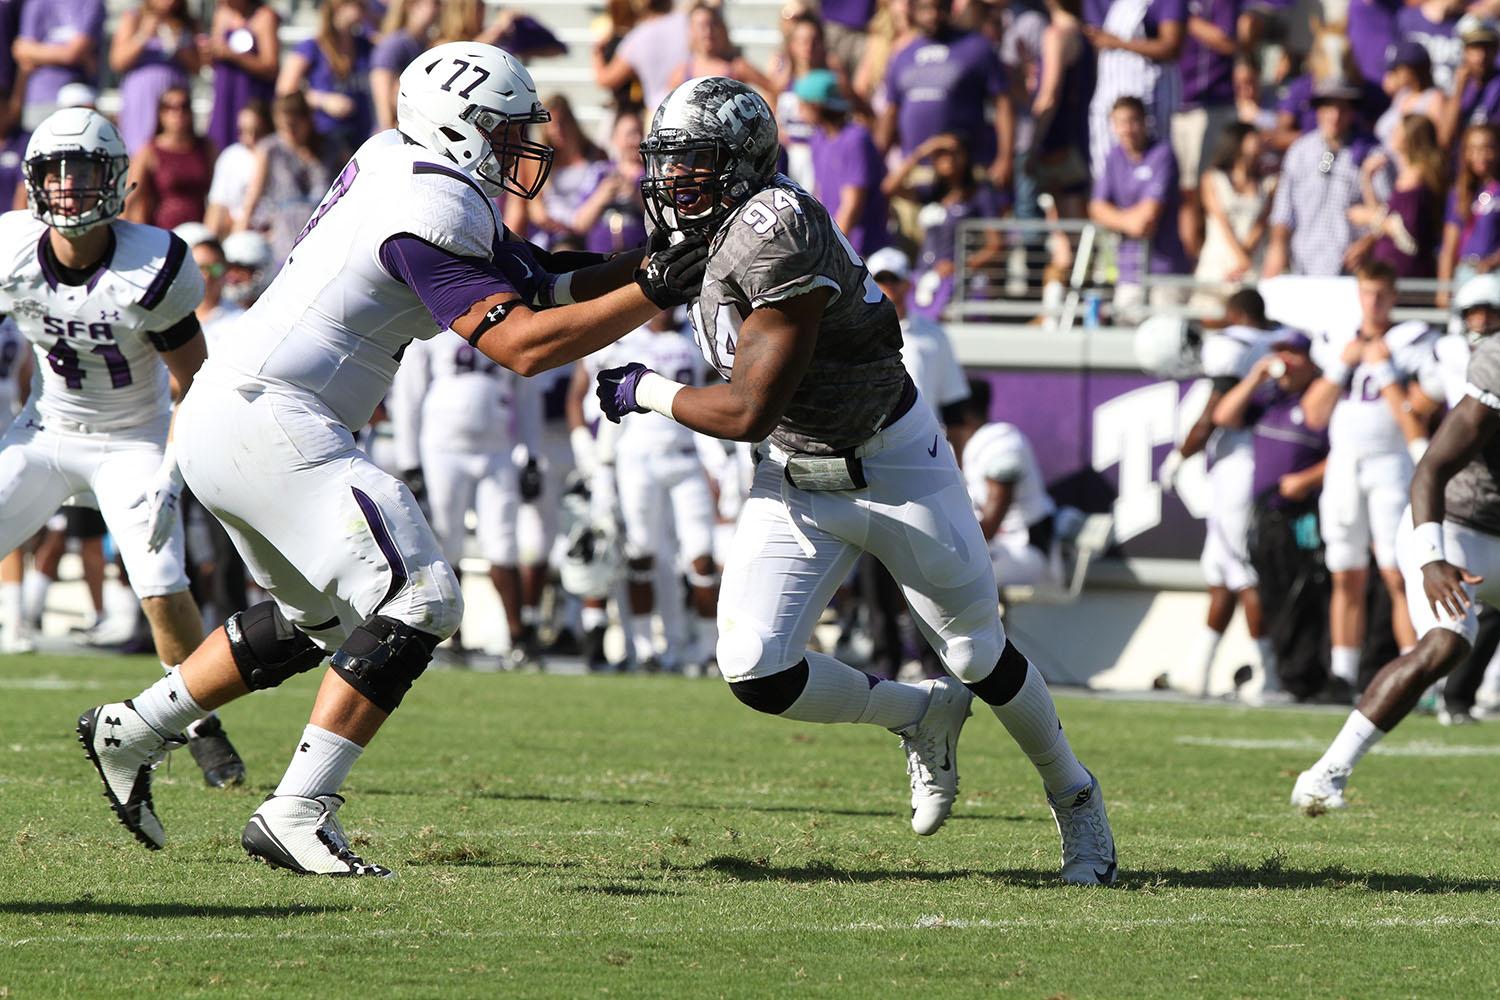 Nine+different+Horned+Frogs+scored+touchdowns+in+Saturday%E2%80%99s+70-7+win+over+Stephen+F.+Austin+in+the+home+opener+at+Amon+G.+Carter+Stadium.